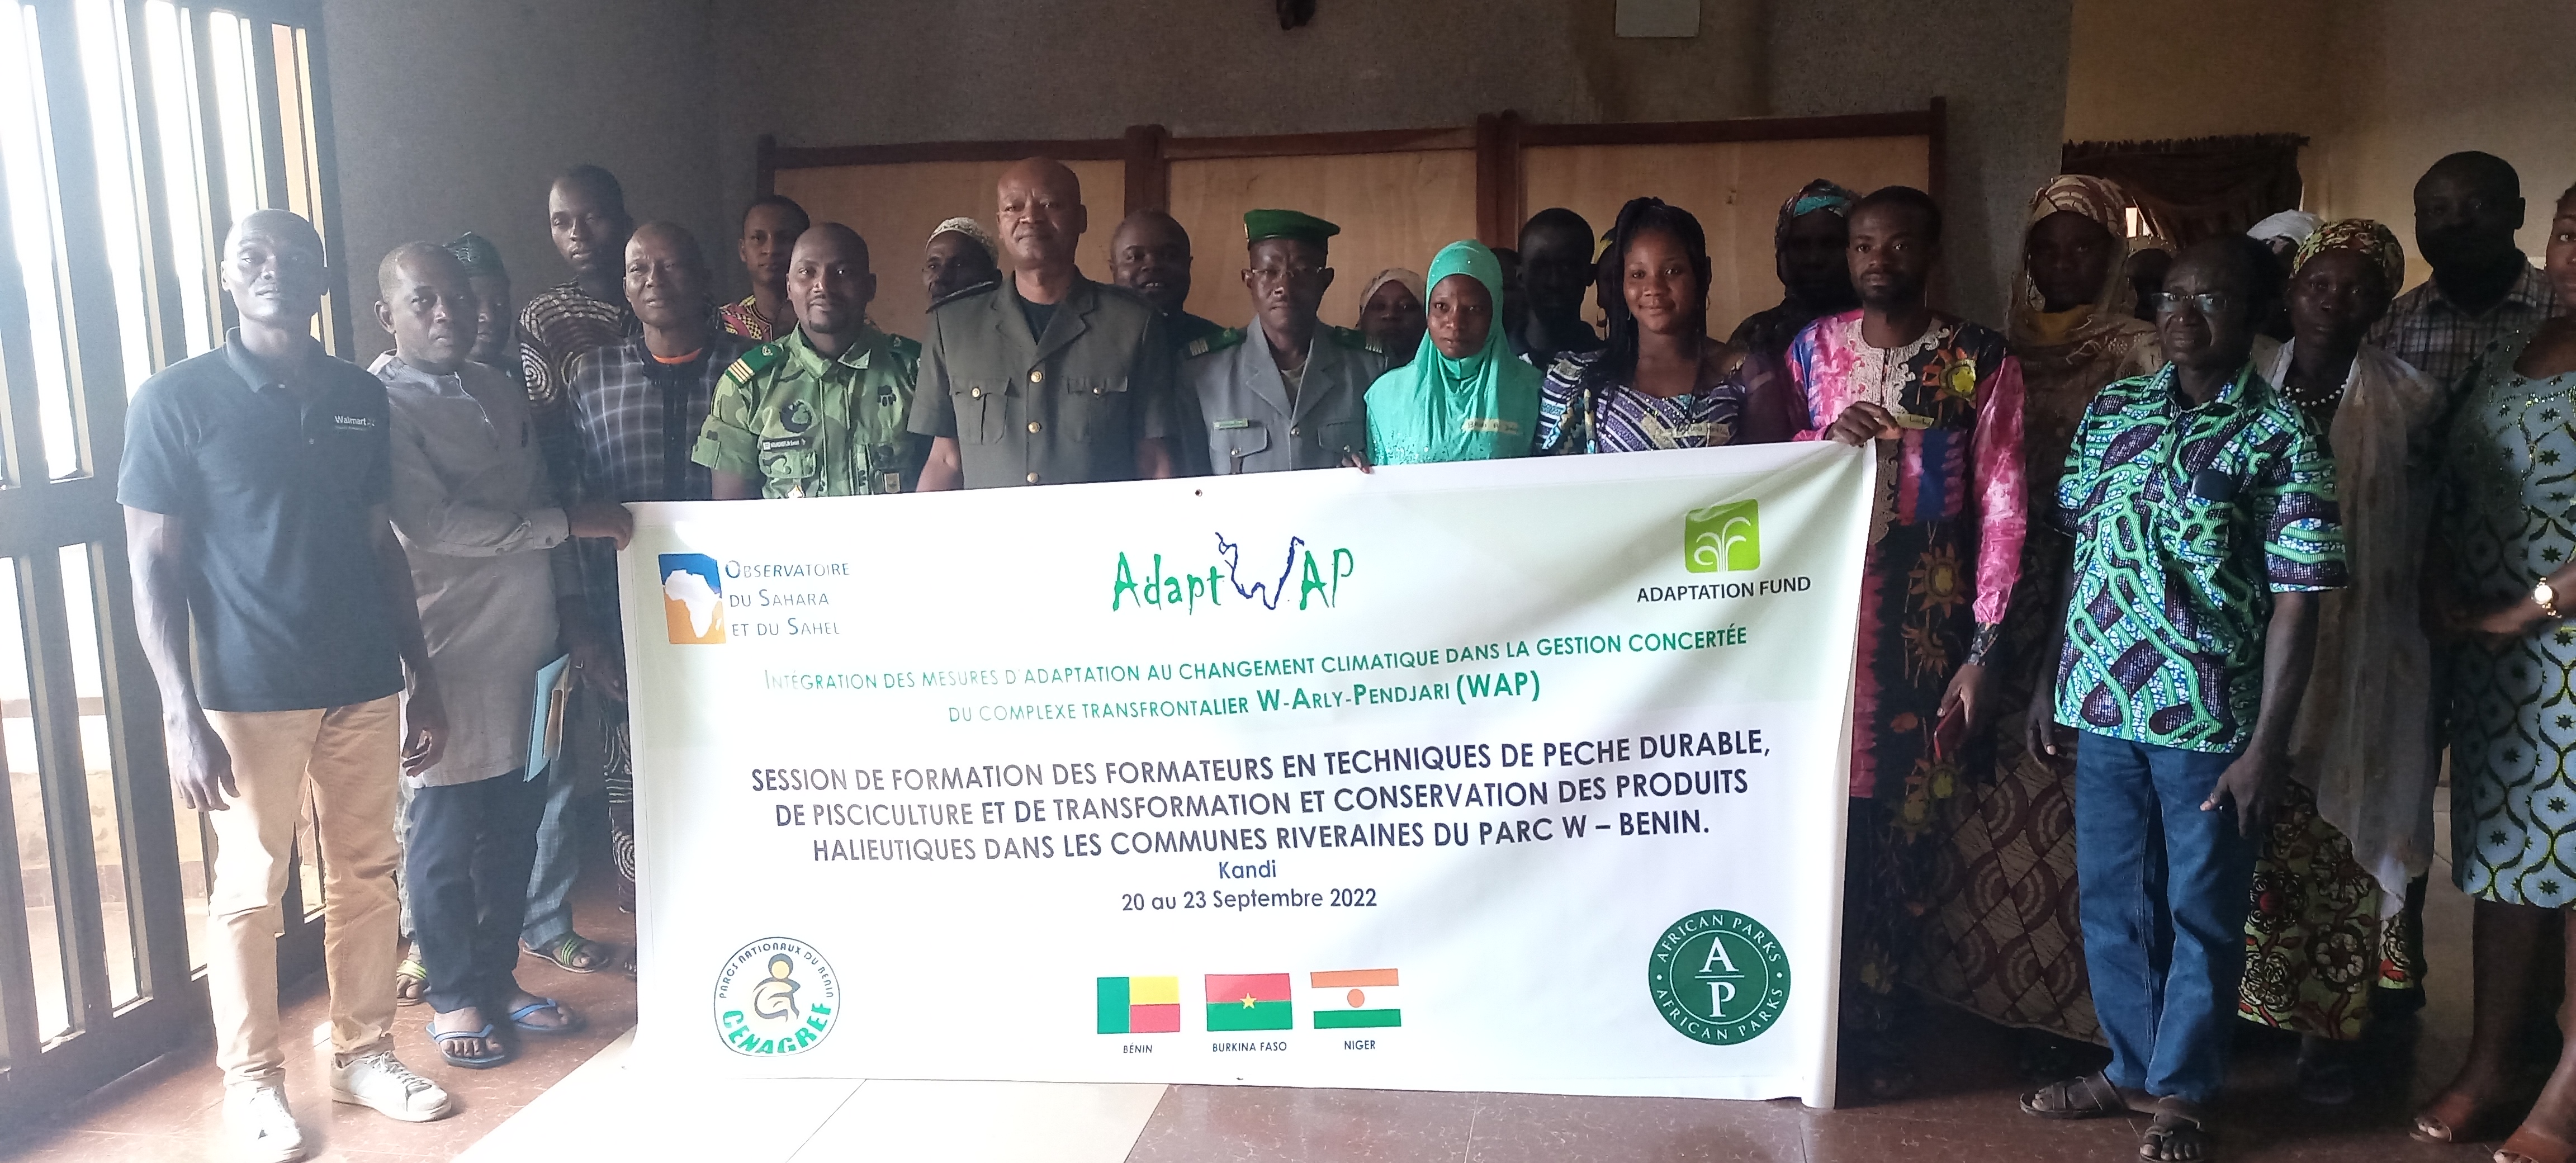 AdaptWAP project - Benin, training on sustainable management of fishing resources 